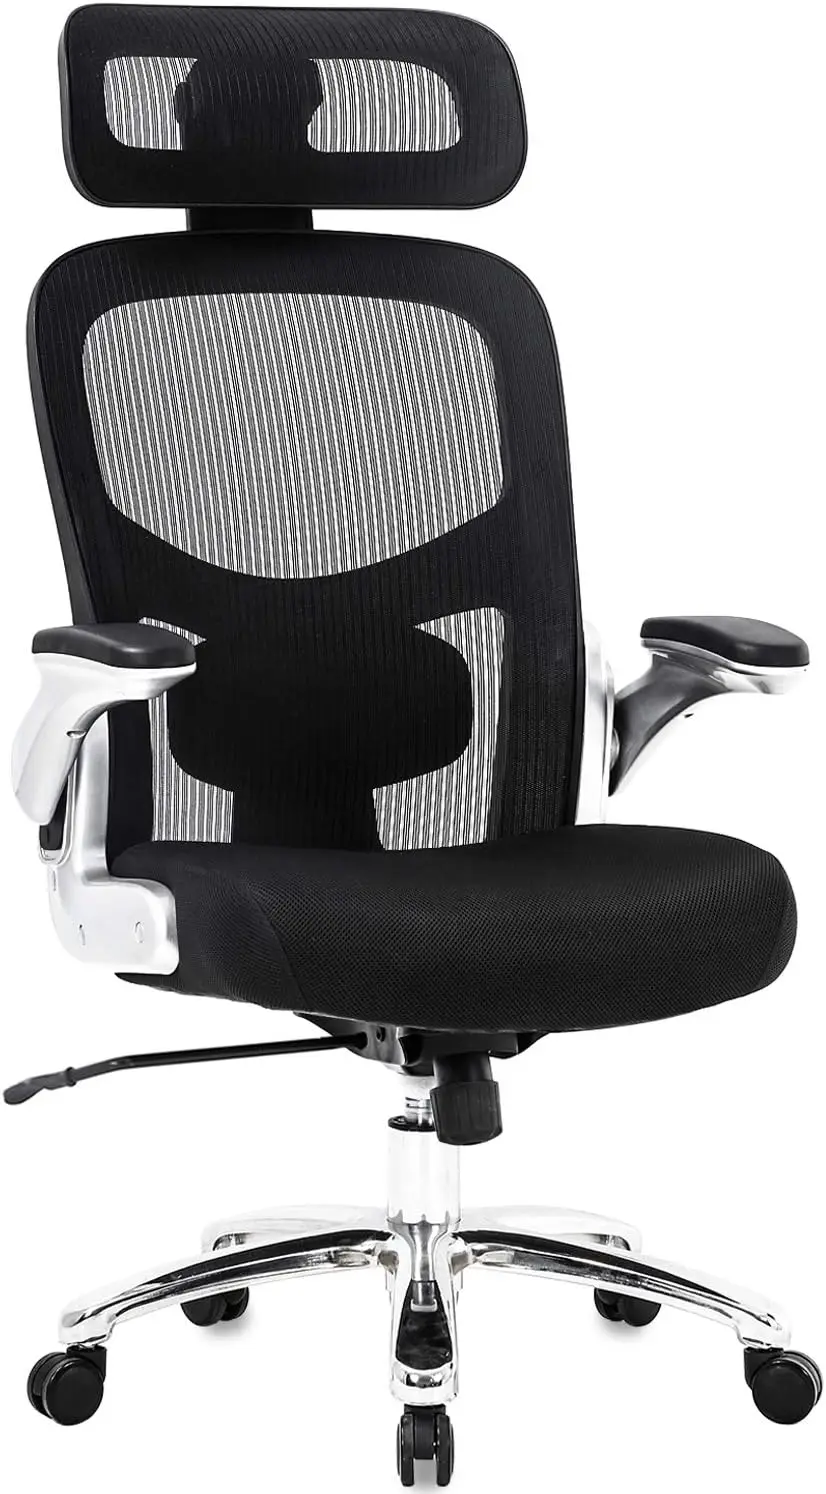 

and Tall Office Chair 500lbs Wide Seat Executive Desk Chair with Lumbar Support Flip UP Arms Headrest High Back Computer Chair E